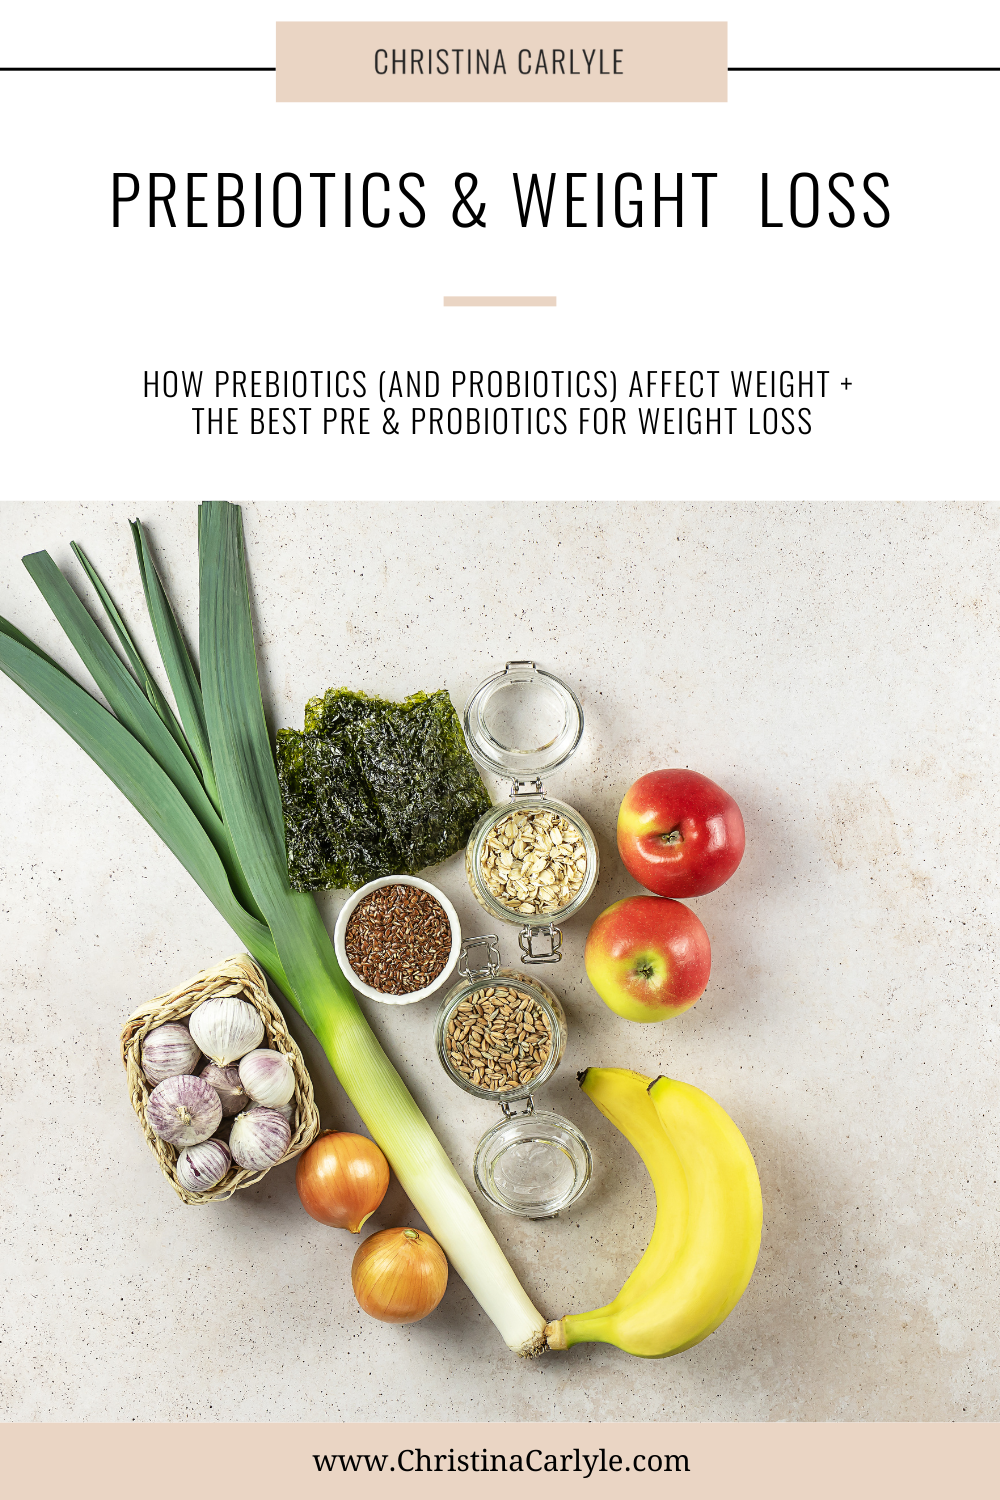 prebiotic foods and text that says Prebiotics & Weight Loss